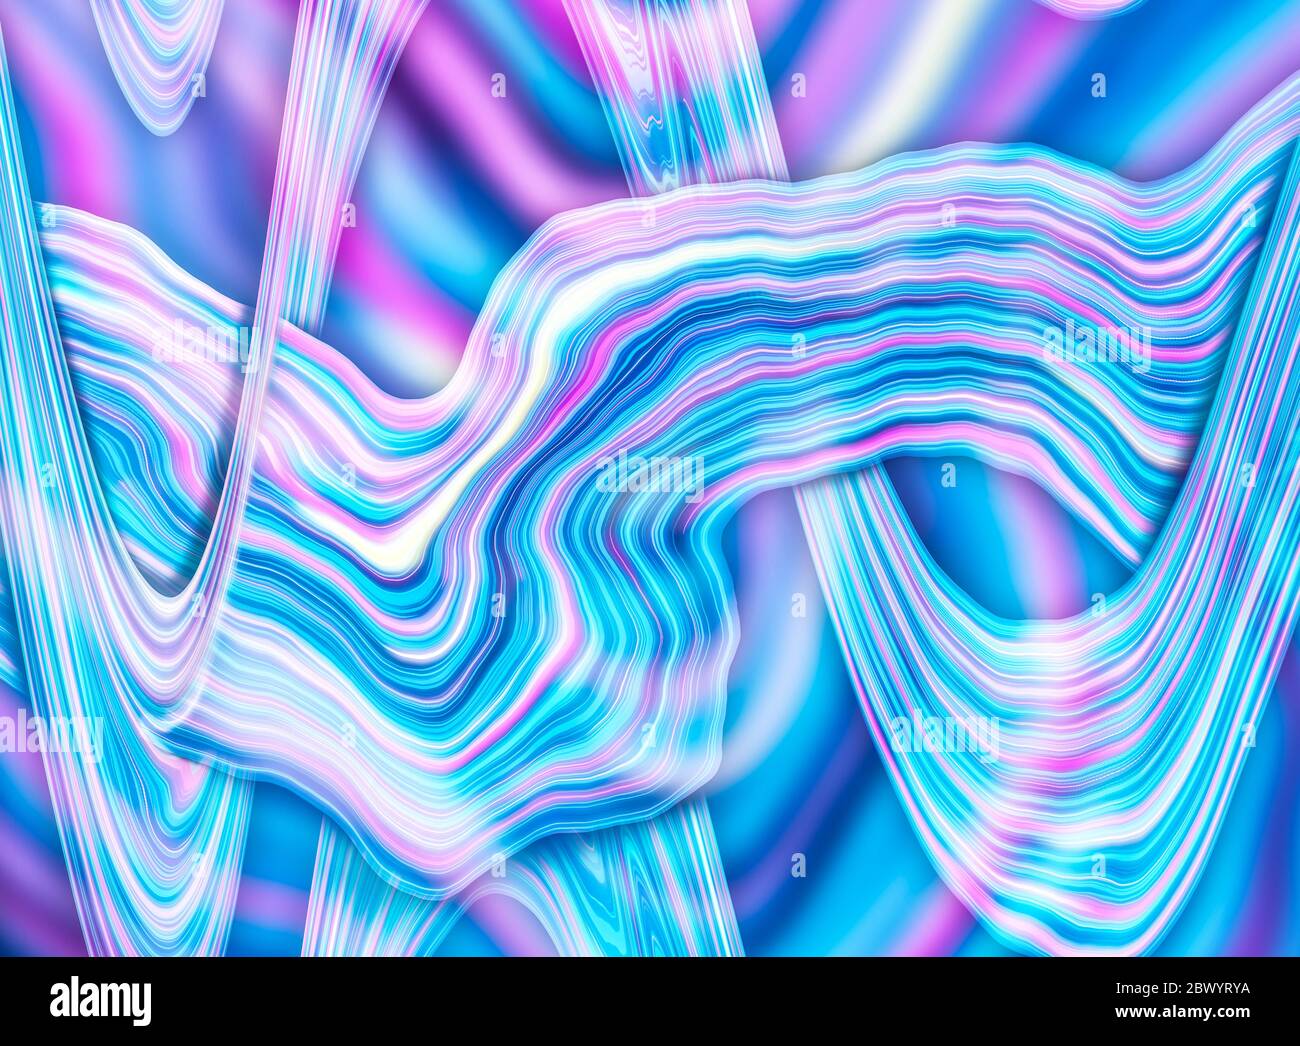 Fantasy color creative wallpaper, holographic metal foil texture background. Stock Photo